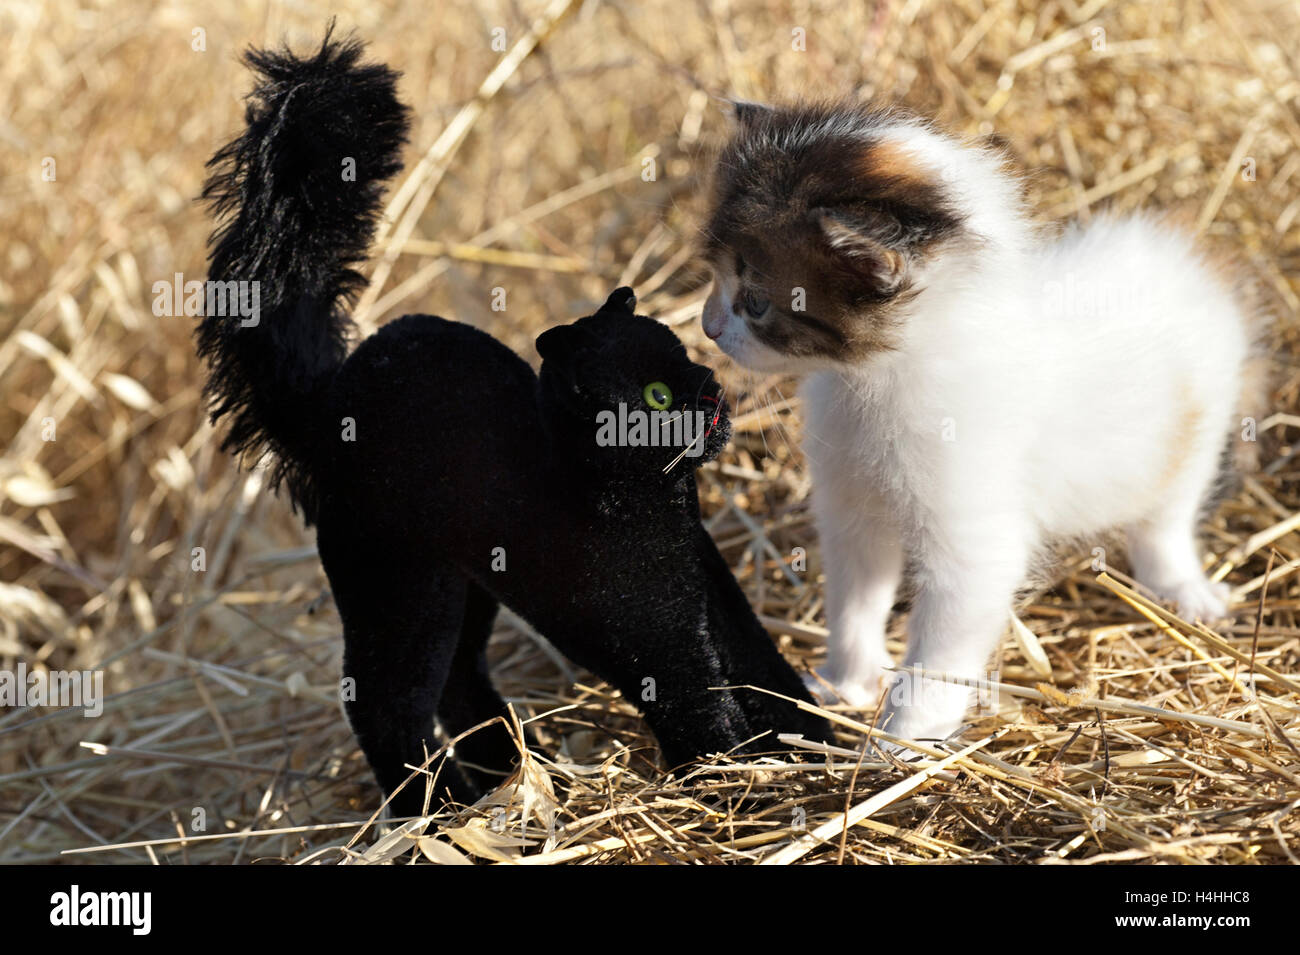 Kitten face to face with a black plush cat in a field Stock Photo